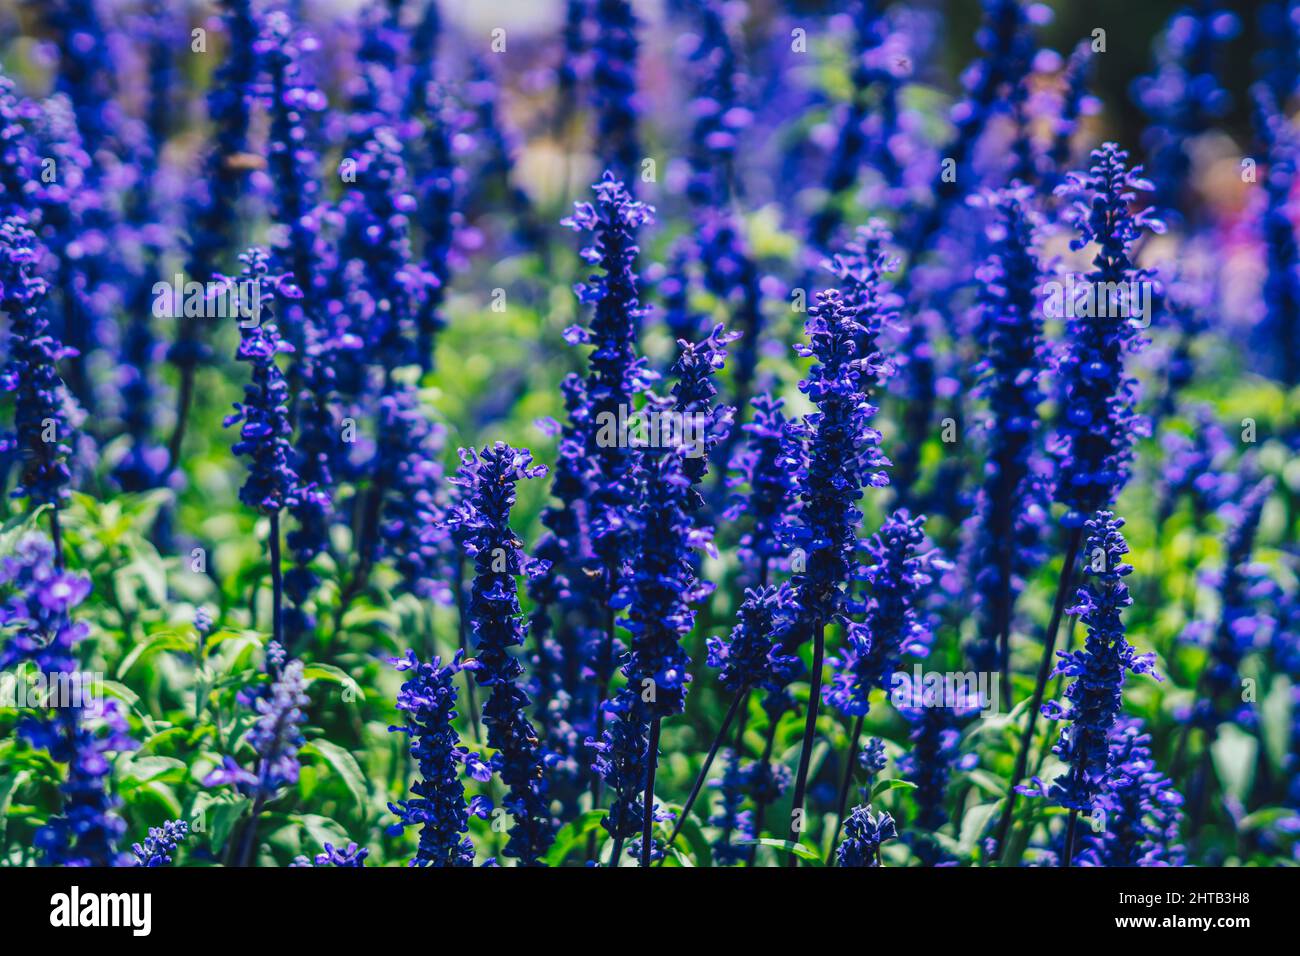 Real beauty nature photo background. Lamiaceae, Lavender field herb flower plant. Blue violet lilac color tone in stock. Tubular calyx corolla Stock Photo